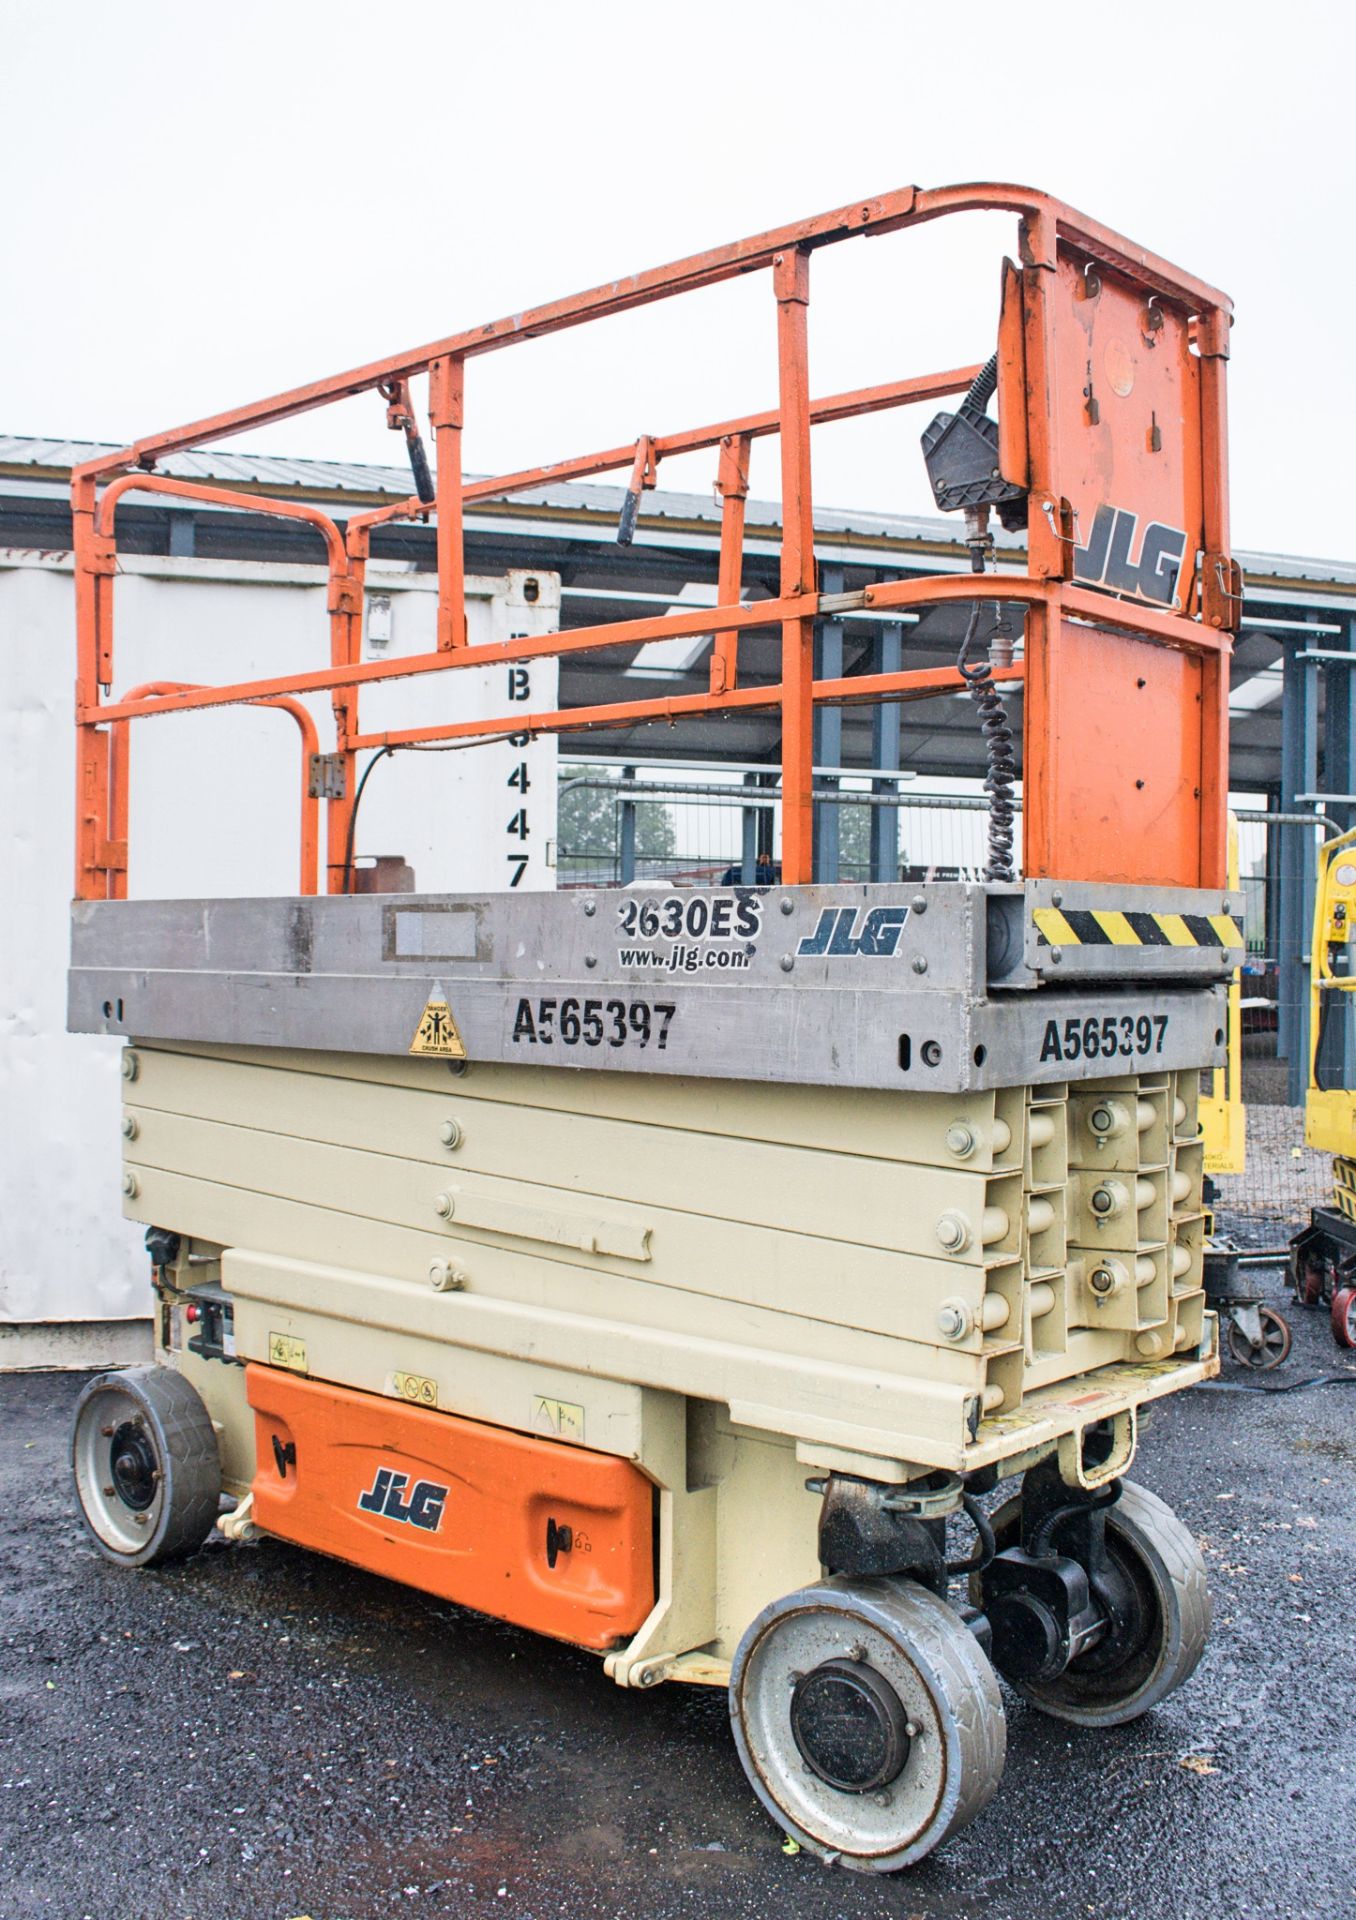 JLG 2630ES battery electric scissor lift Year: 2011 S/N: 1931 Recorded Hours: 329 A565397